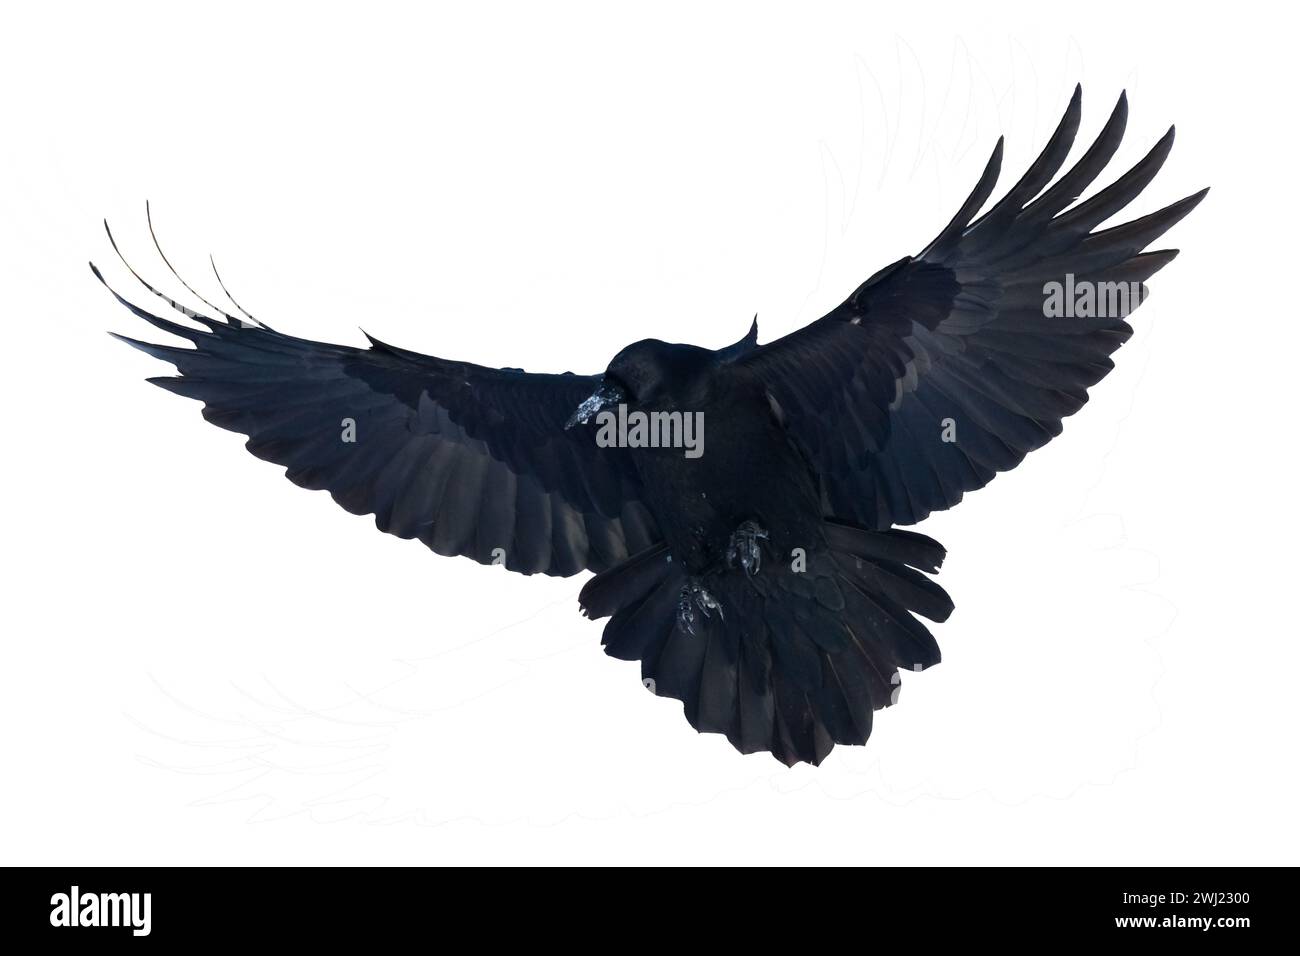 Birds flying raven isolated on white background Corvus corax. Halloween silhouette of a large black bird in flight Stock Photo